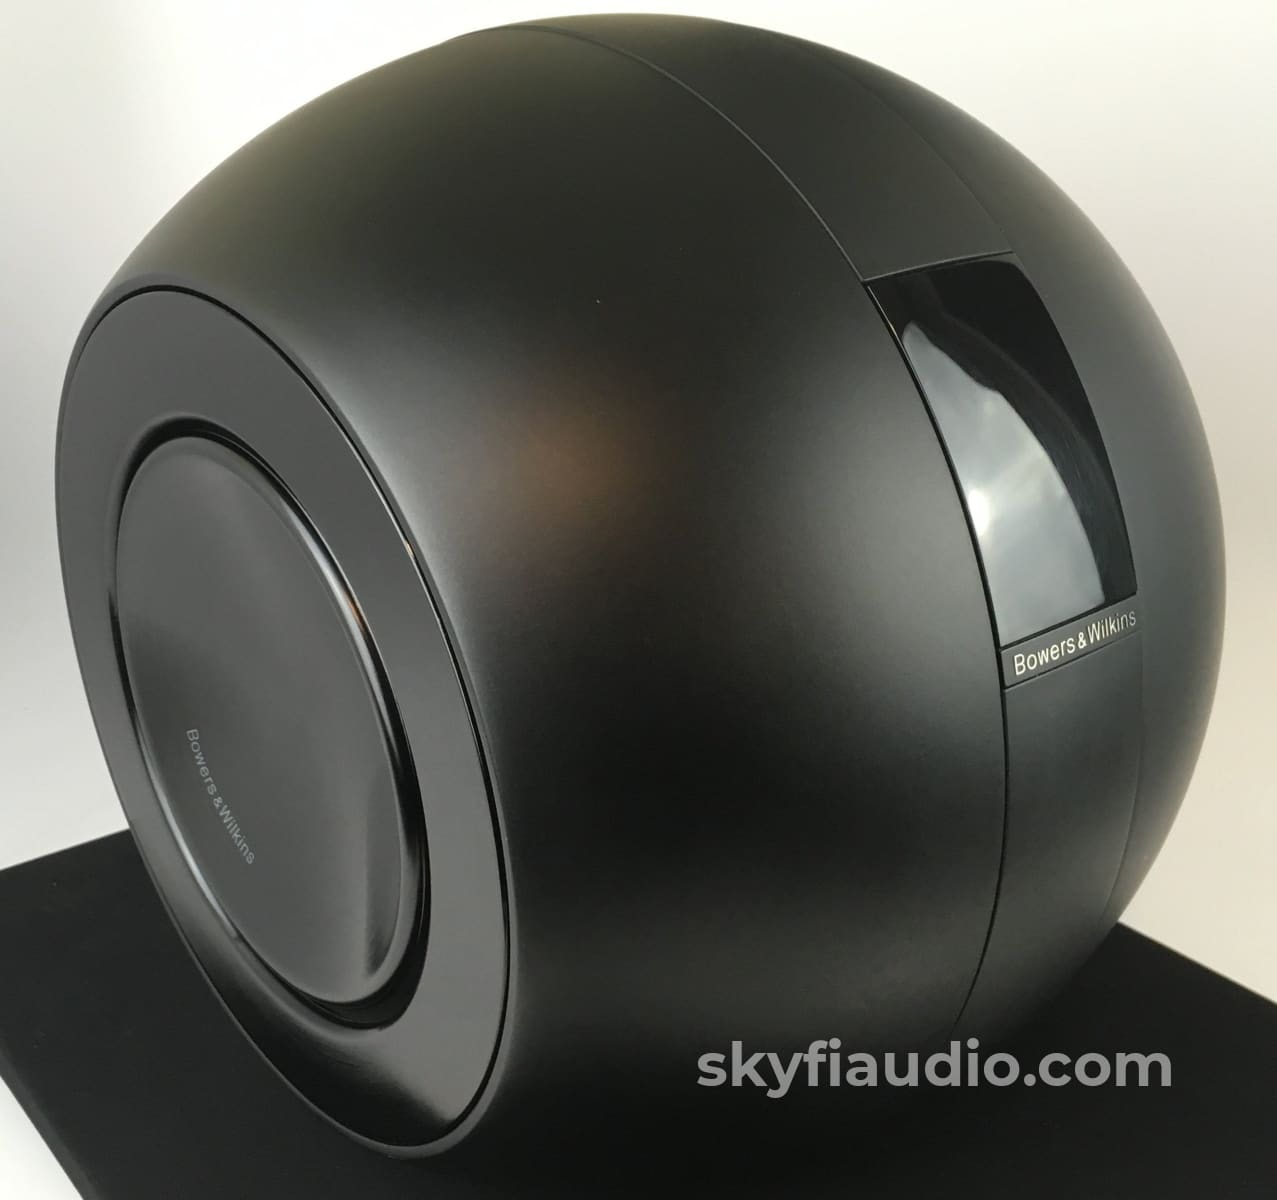 B&W (Bowers & Wilkins) Pv1-D Subwoofer - 400W Compact Kevlar Sub Speakers